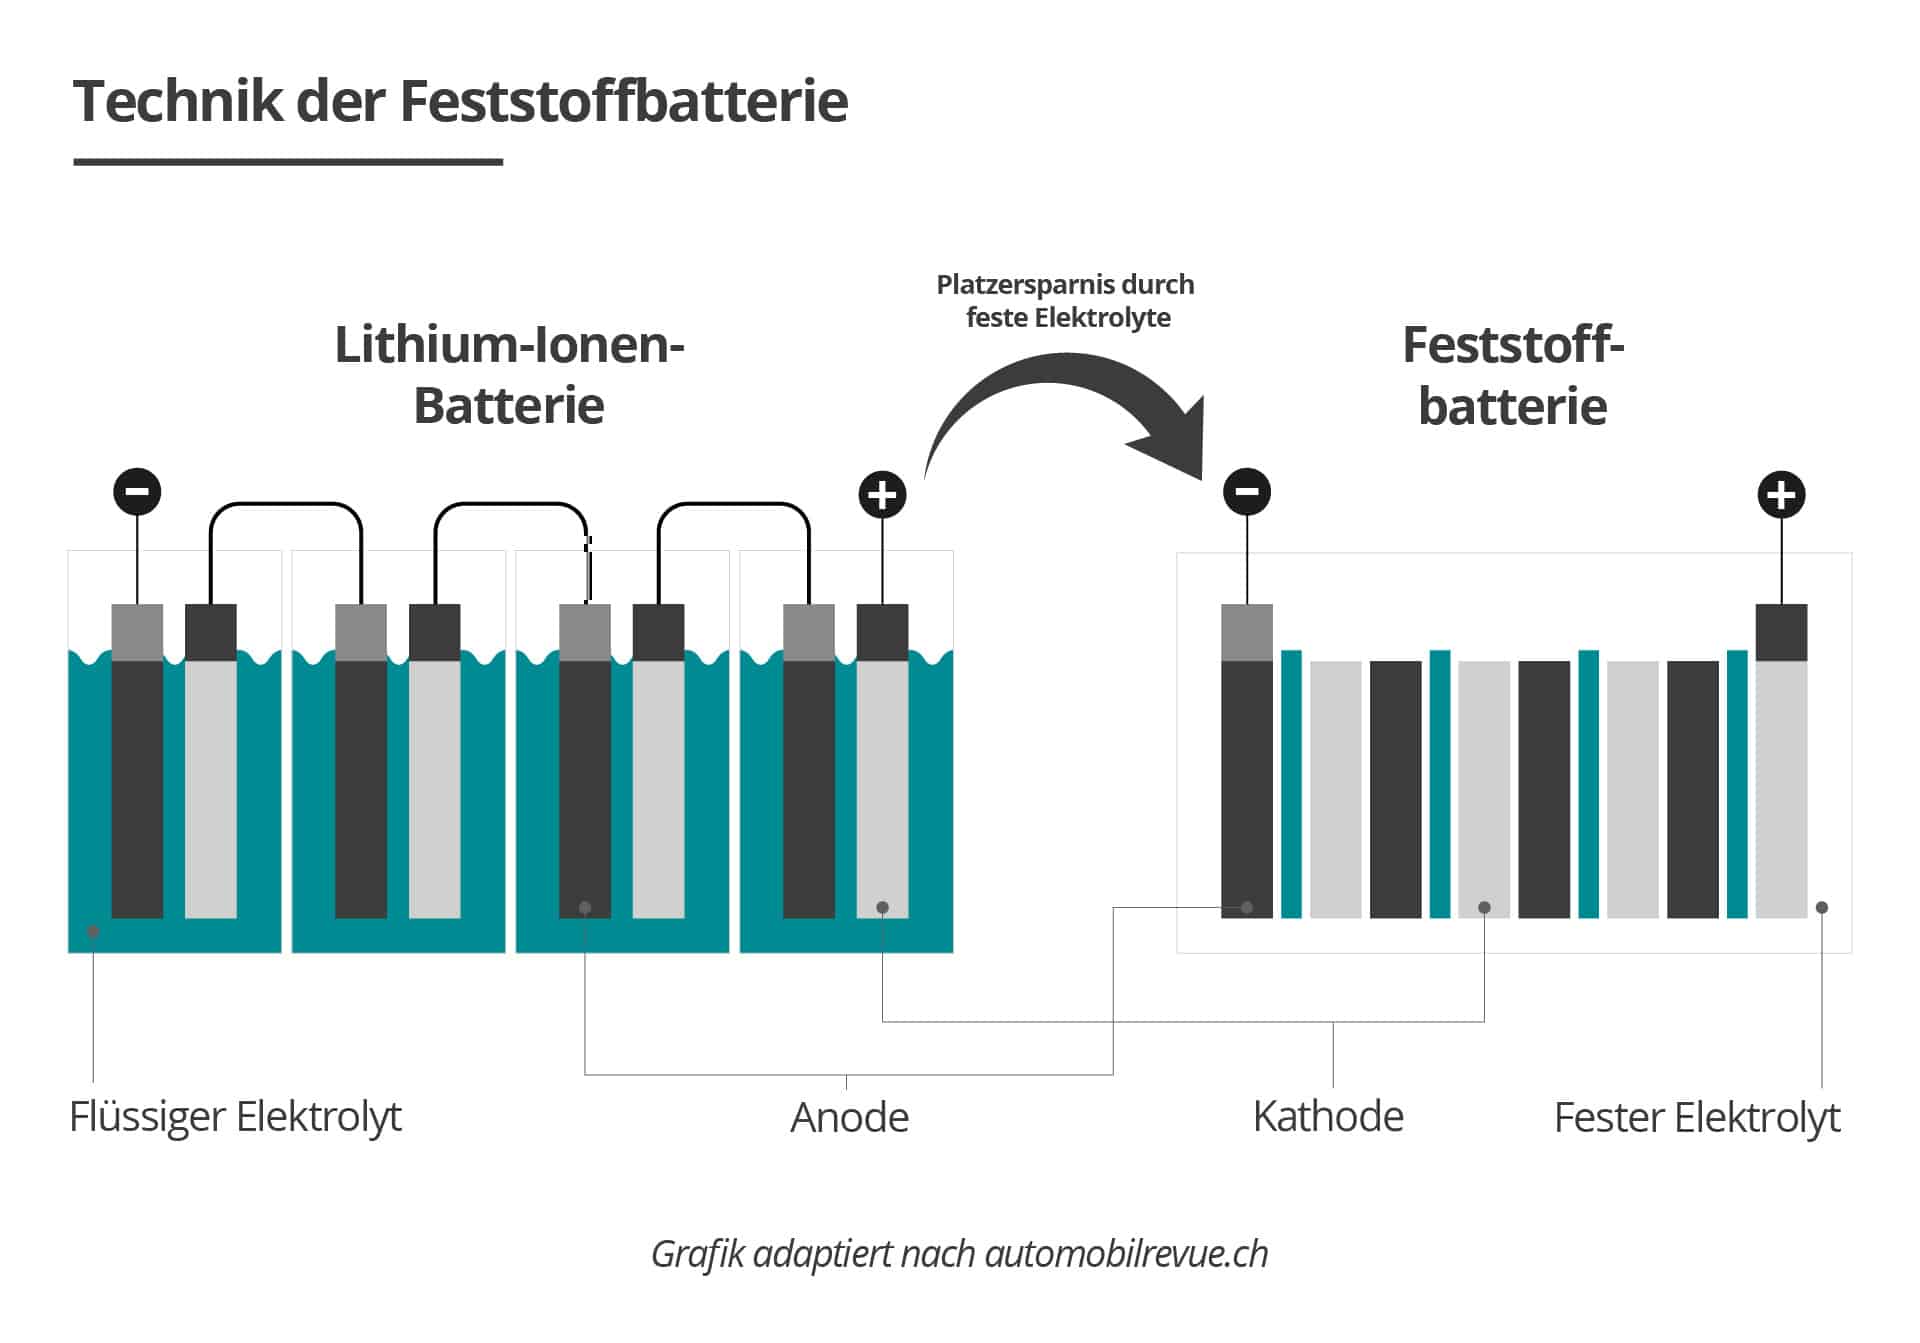 We show the space saving through solid electrolytes in a solid battery